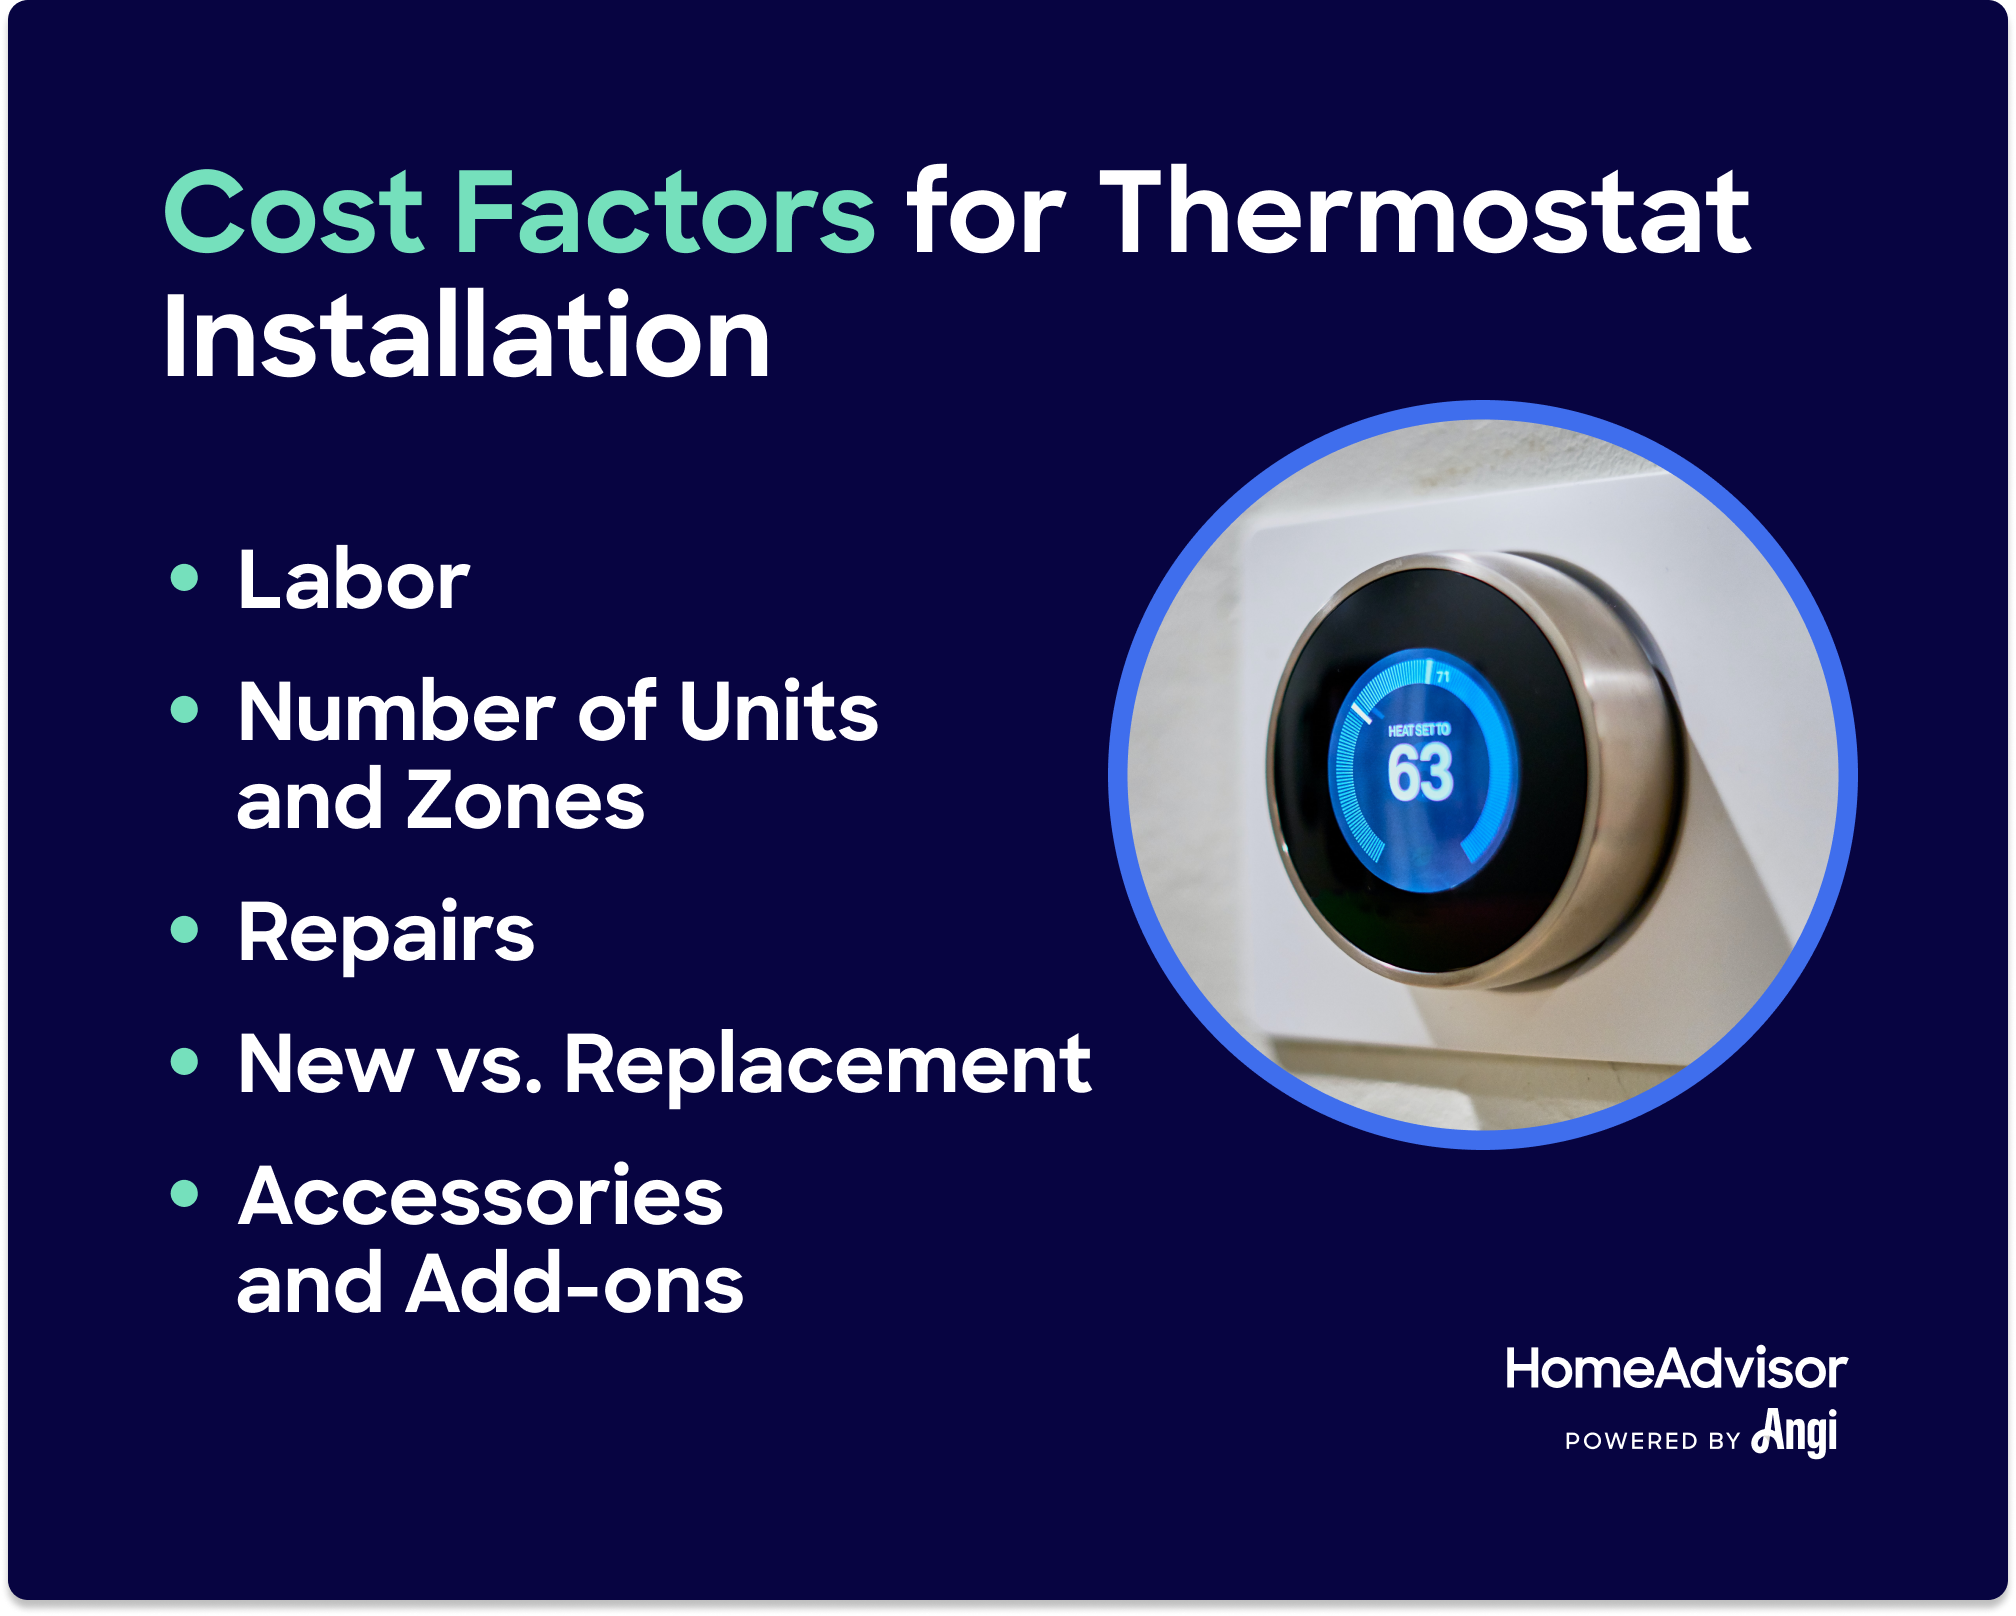 Home Thermostat Replacement Costs